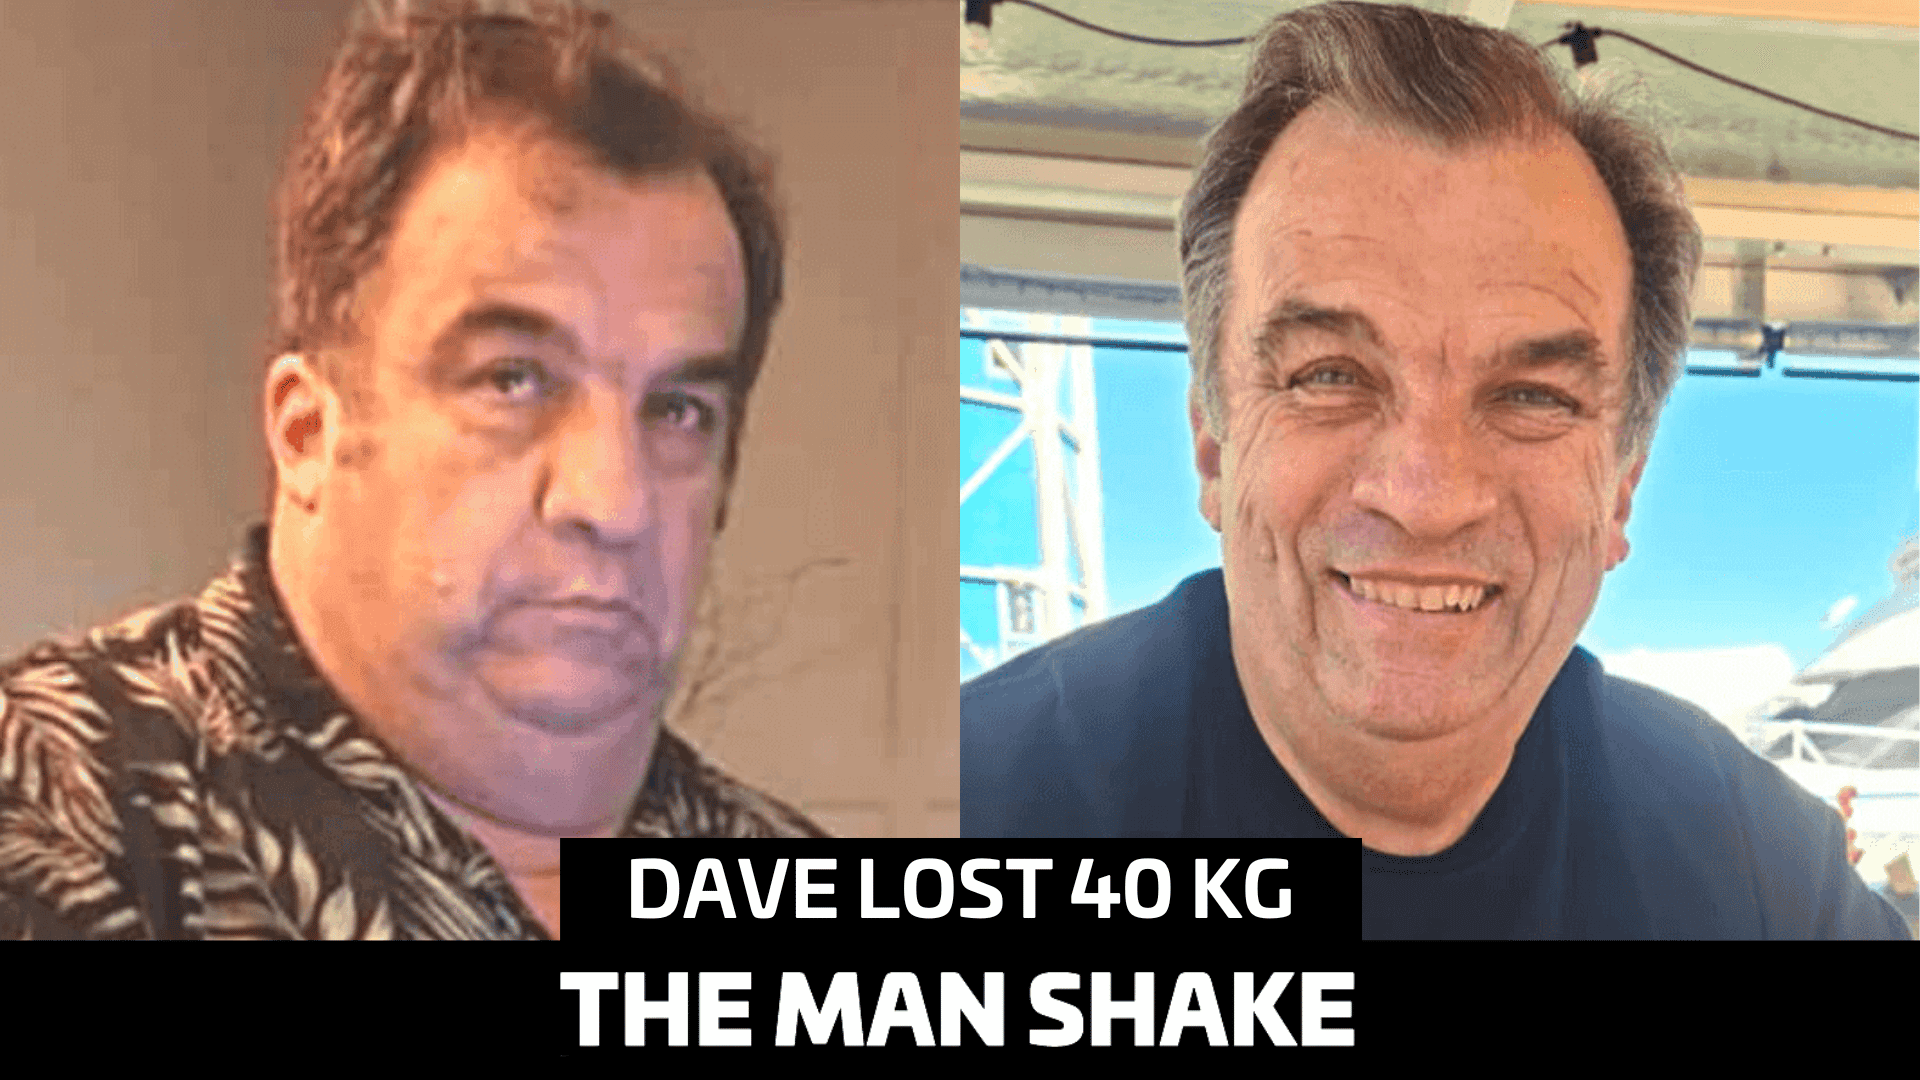 Dave couldn't do his shoes up so he lost 40kg!